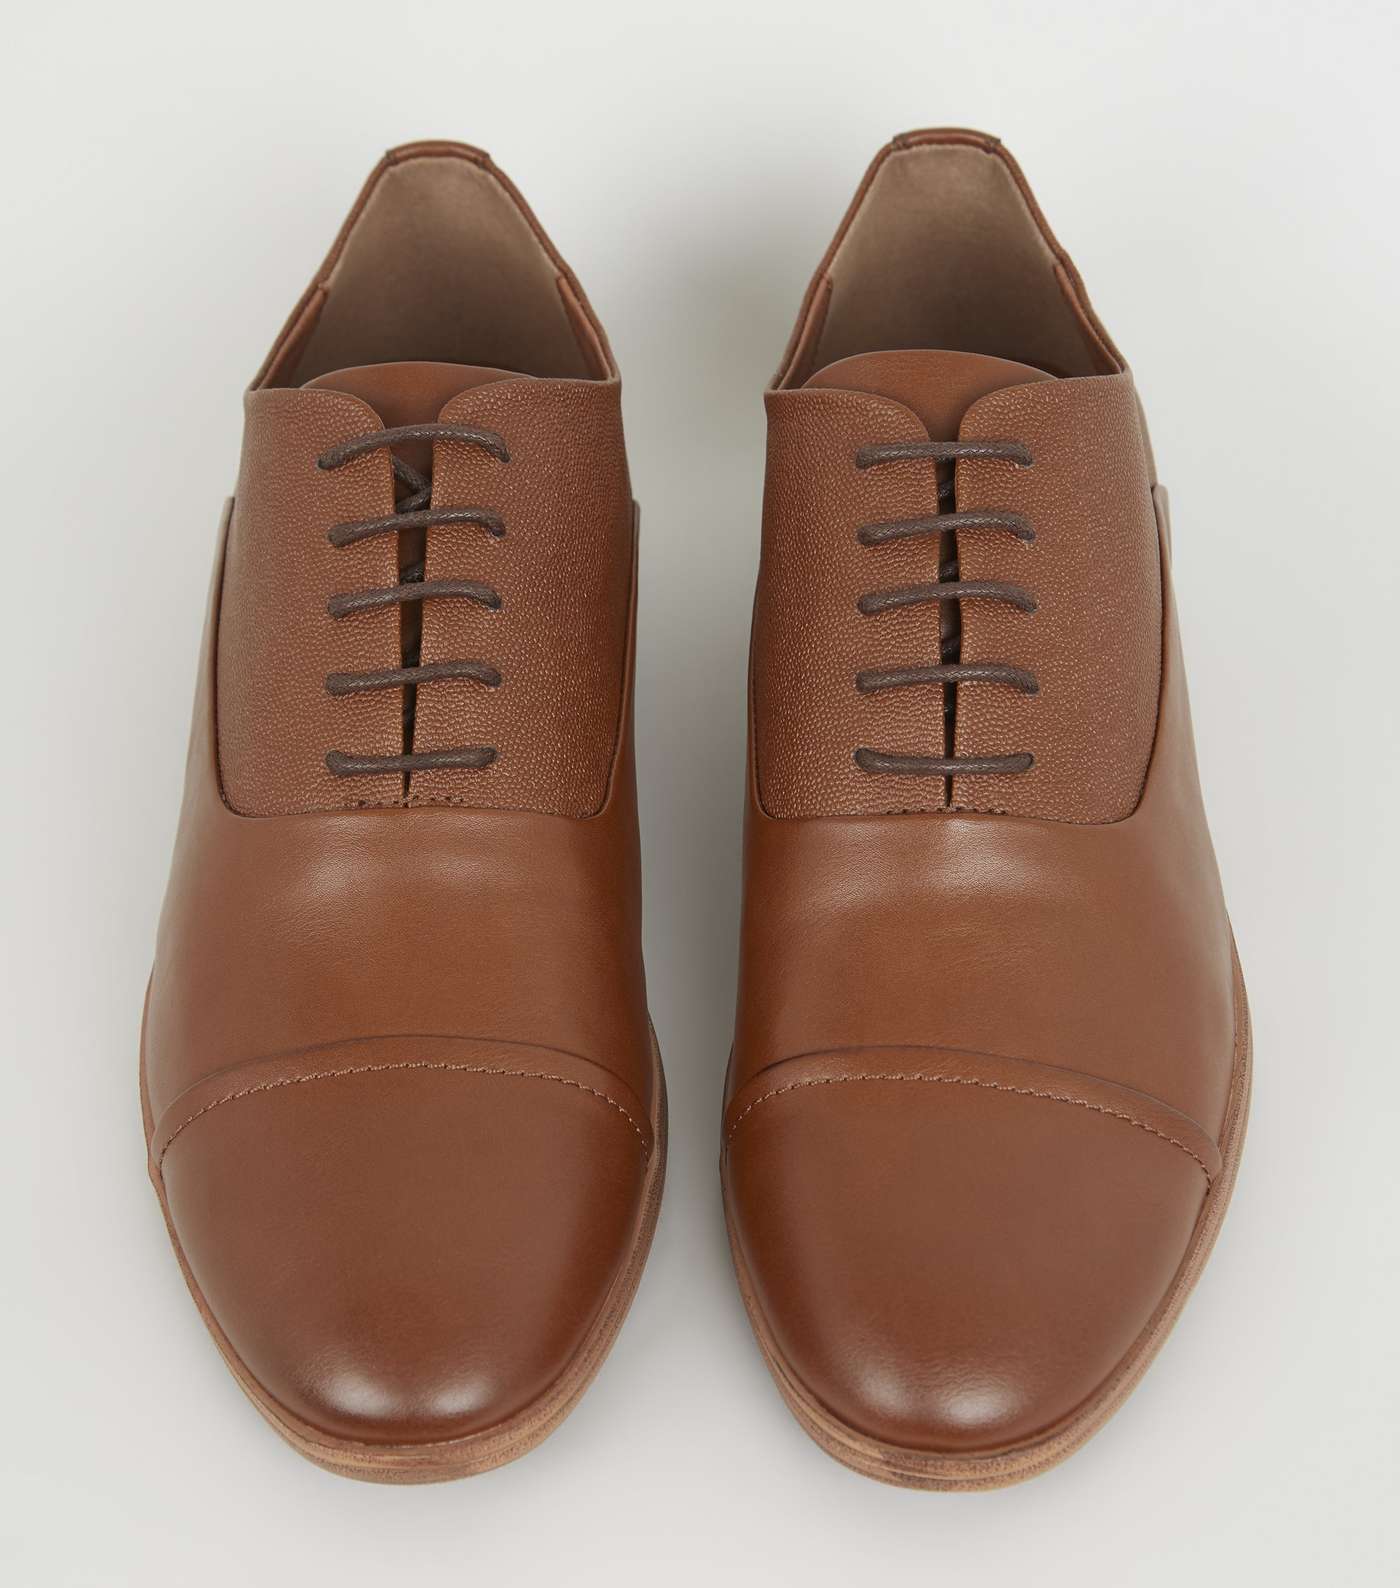 Tan Leather-Look Oxford Shoes Image 3